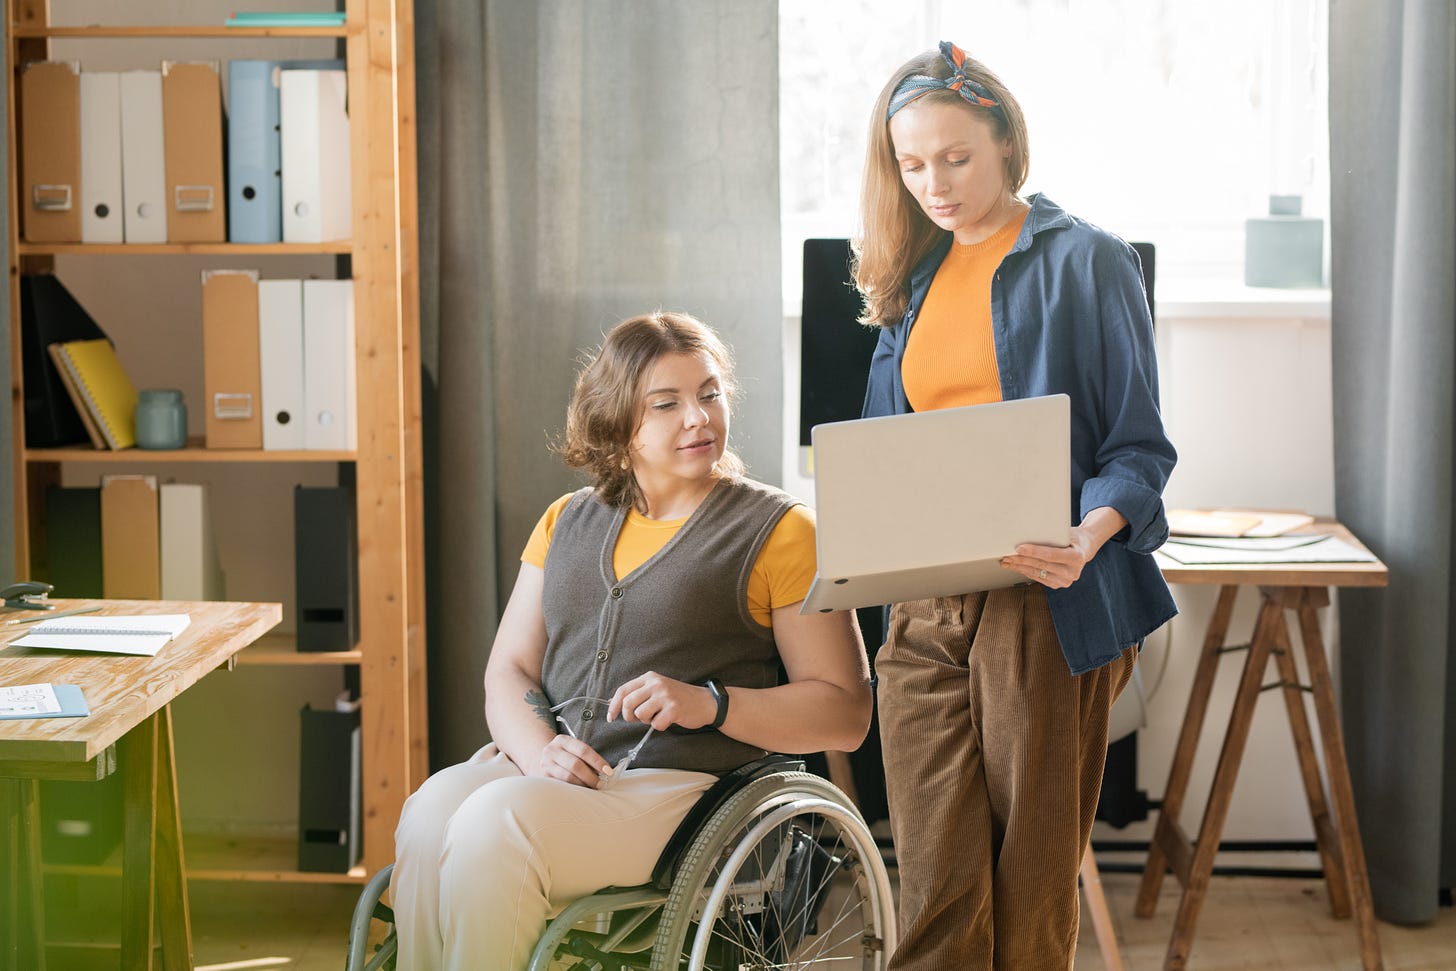 Two women are looking at a laptop in an office. One woman is wearing business casual clothes and is sitting in a wheelchair. The other woman is similarly dressed and is holding the laptop.